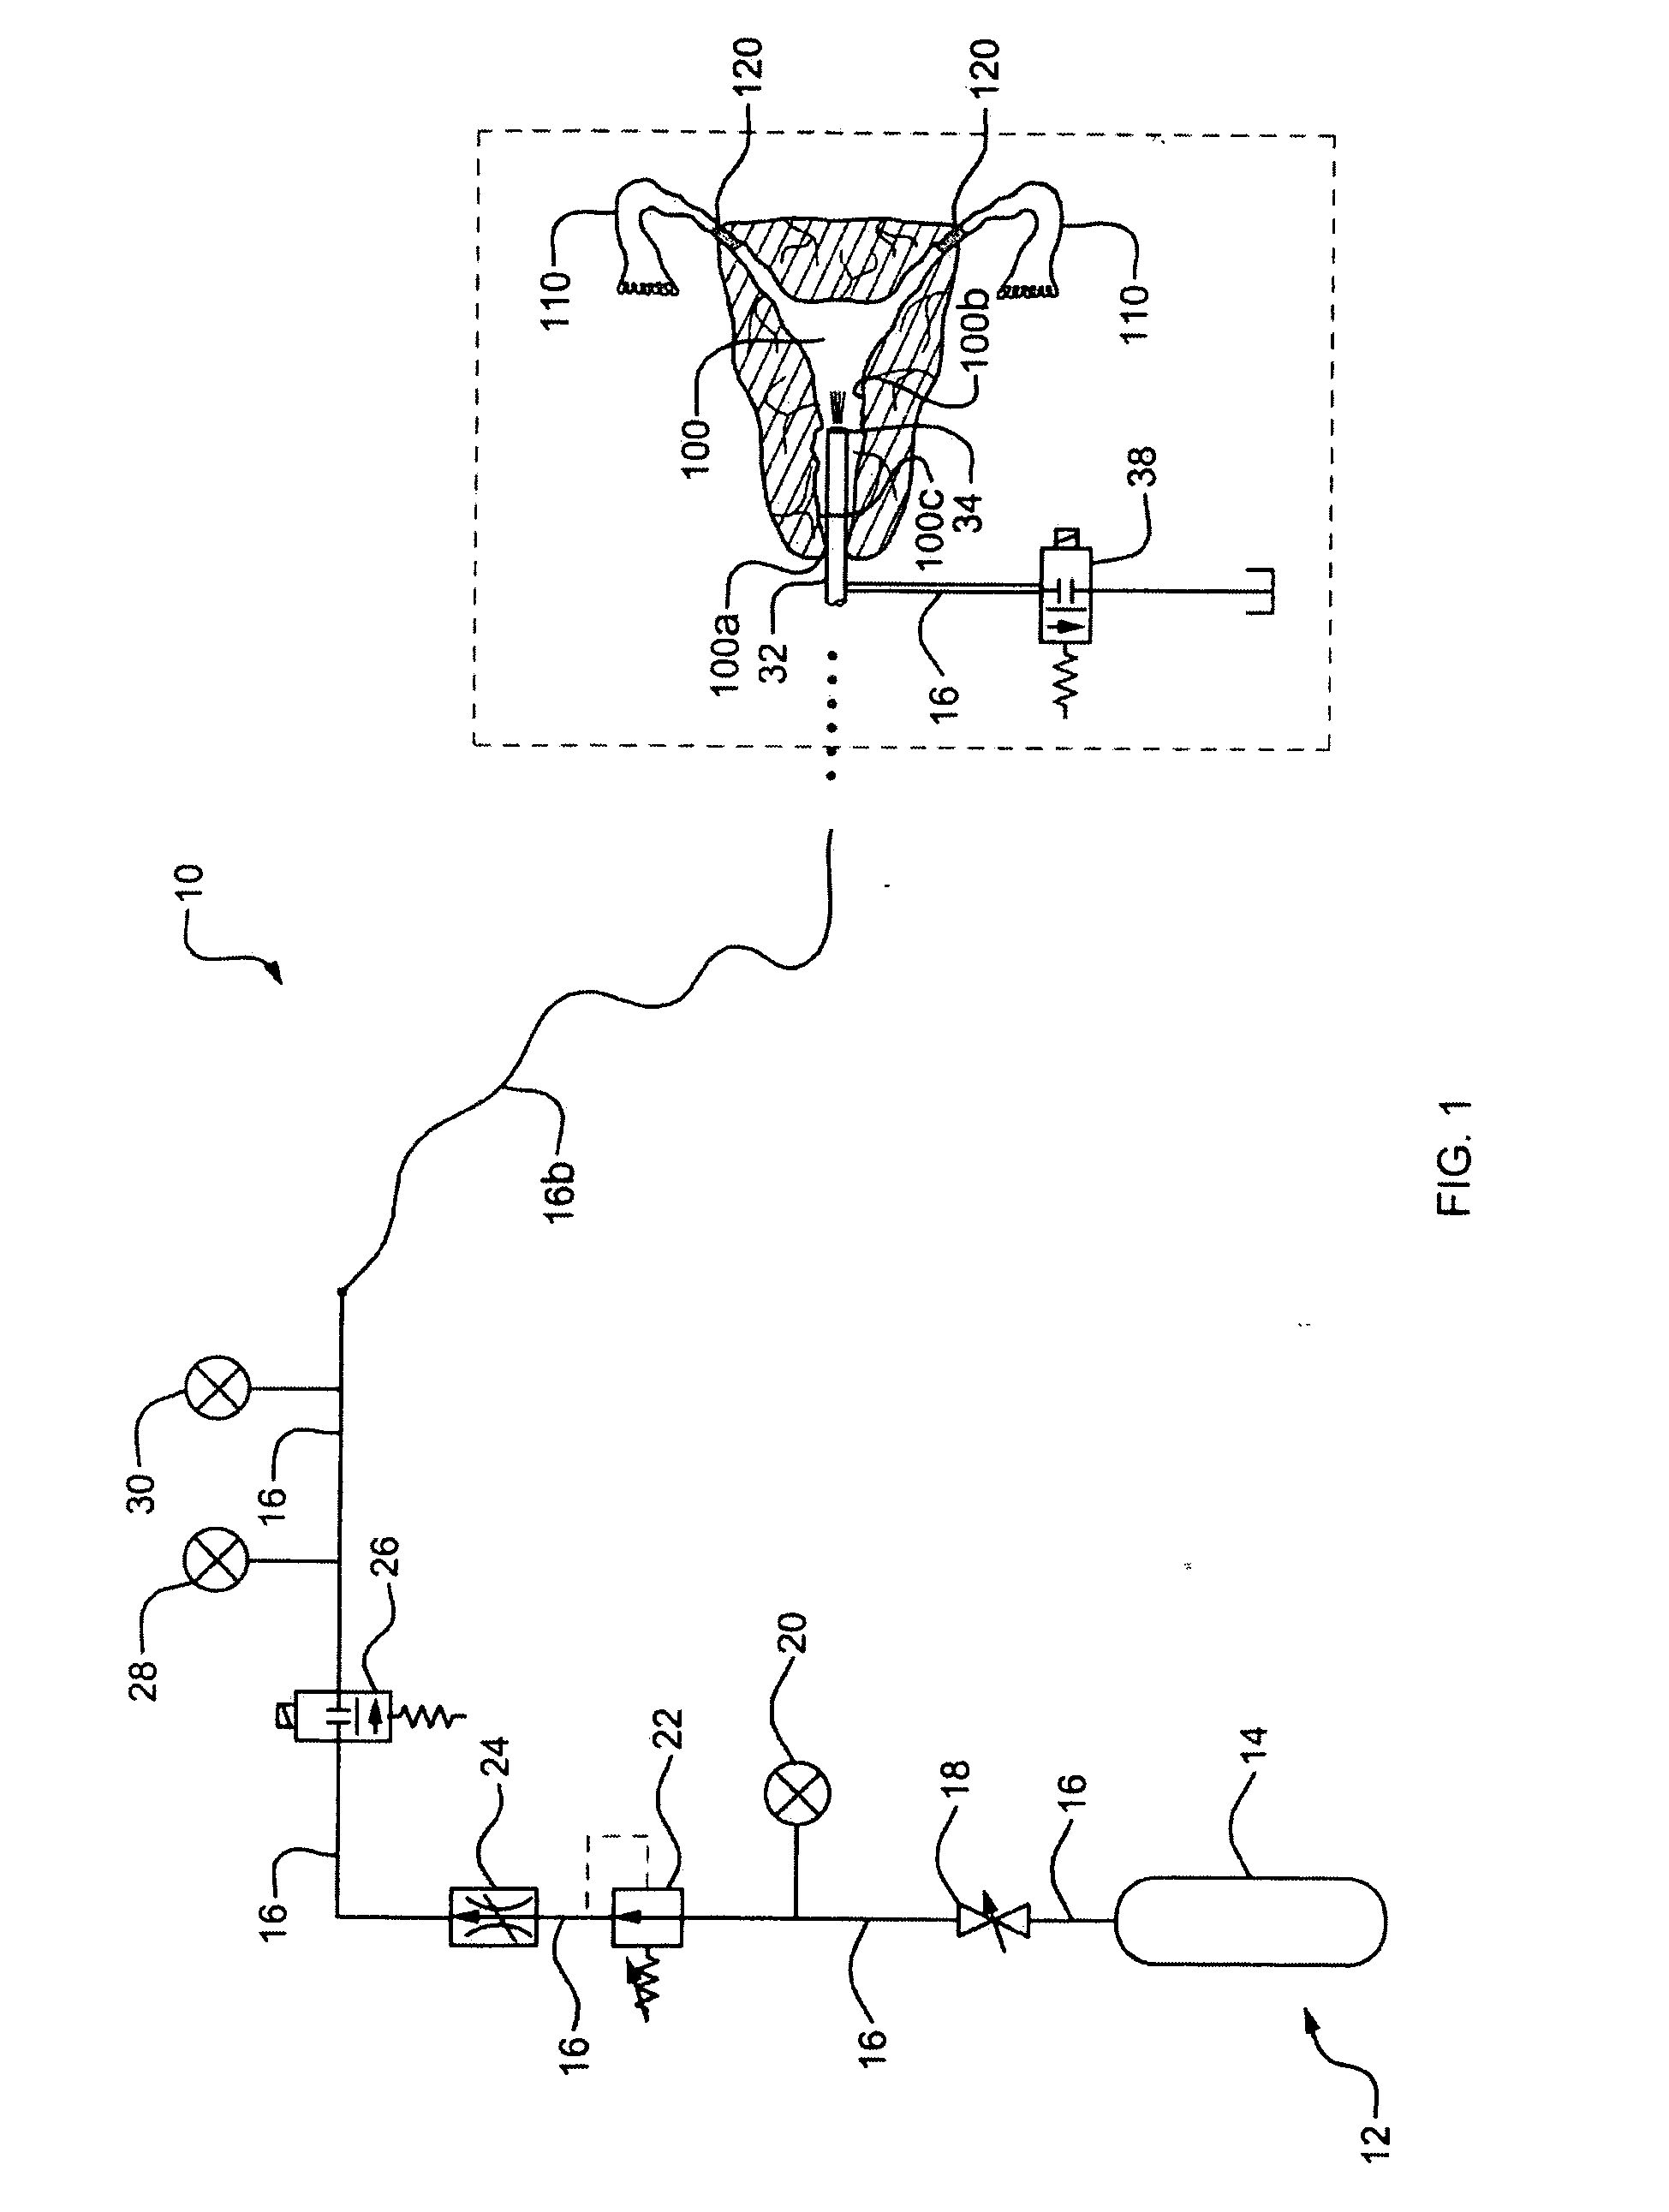 Method and apparatus for verifying occlusion of fallopian tubes